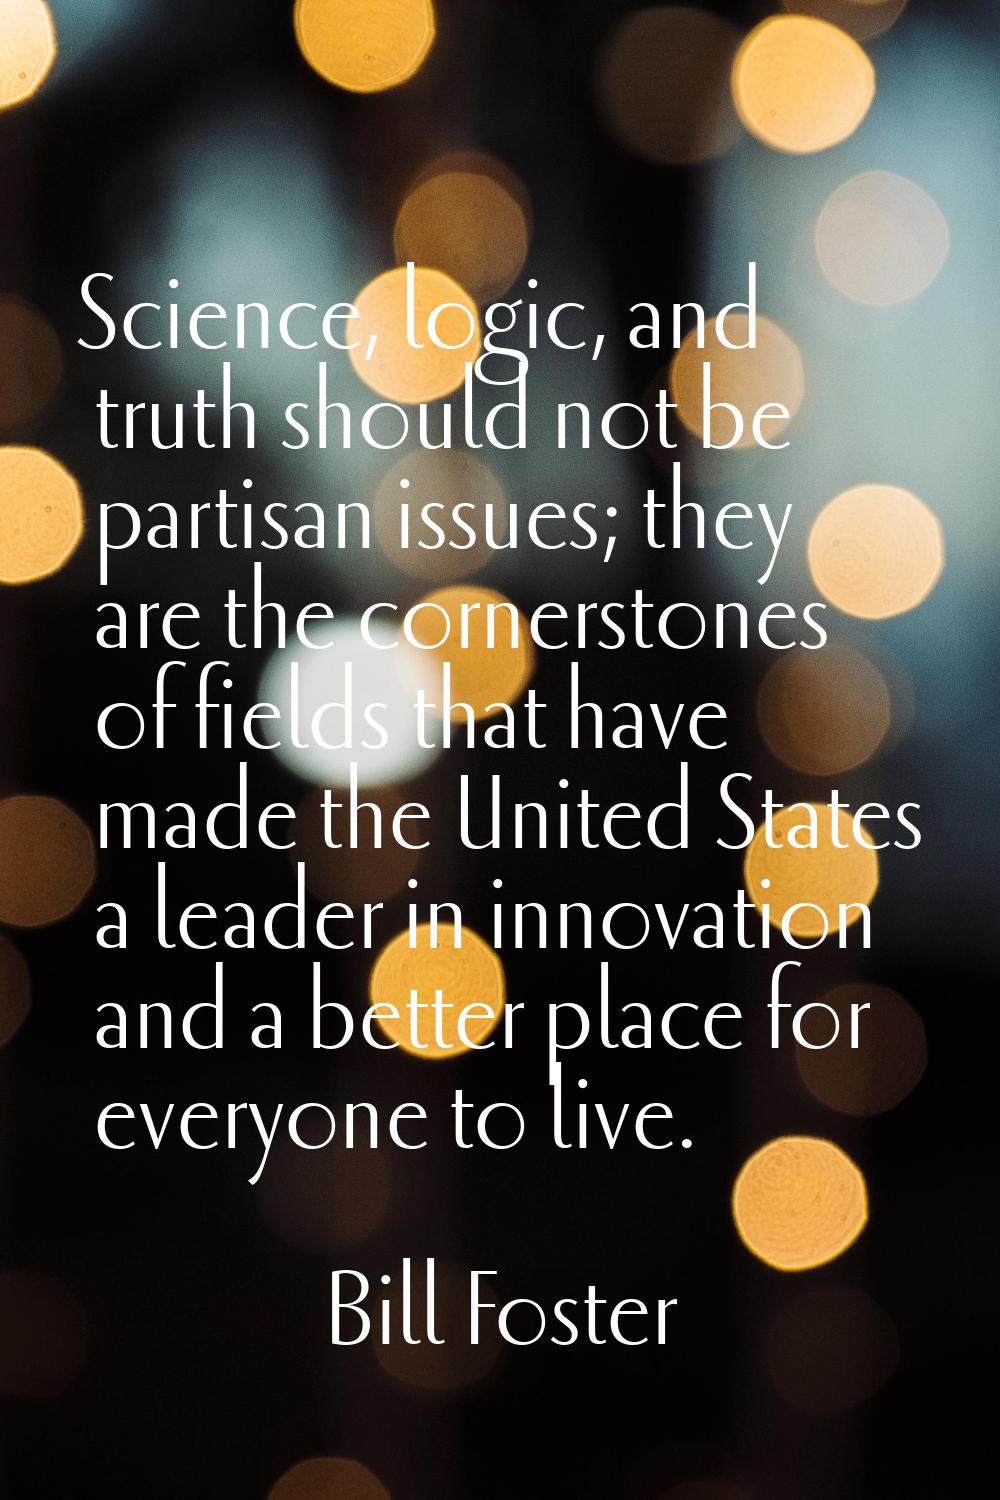 Science, logic, and truth should not be partisan issues; they are the cornerstones of fields that h